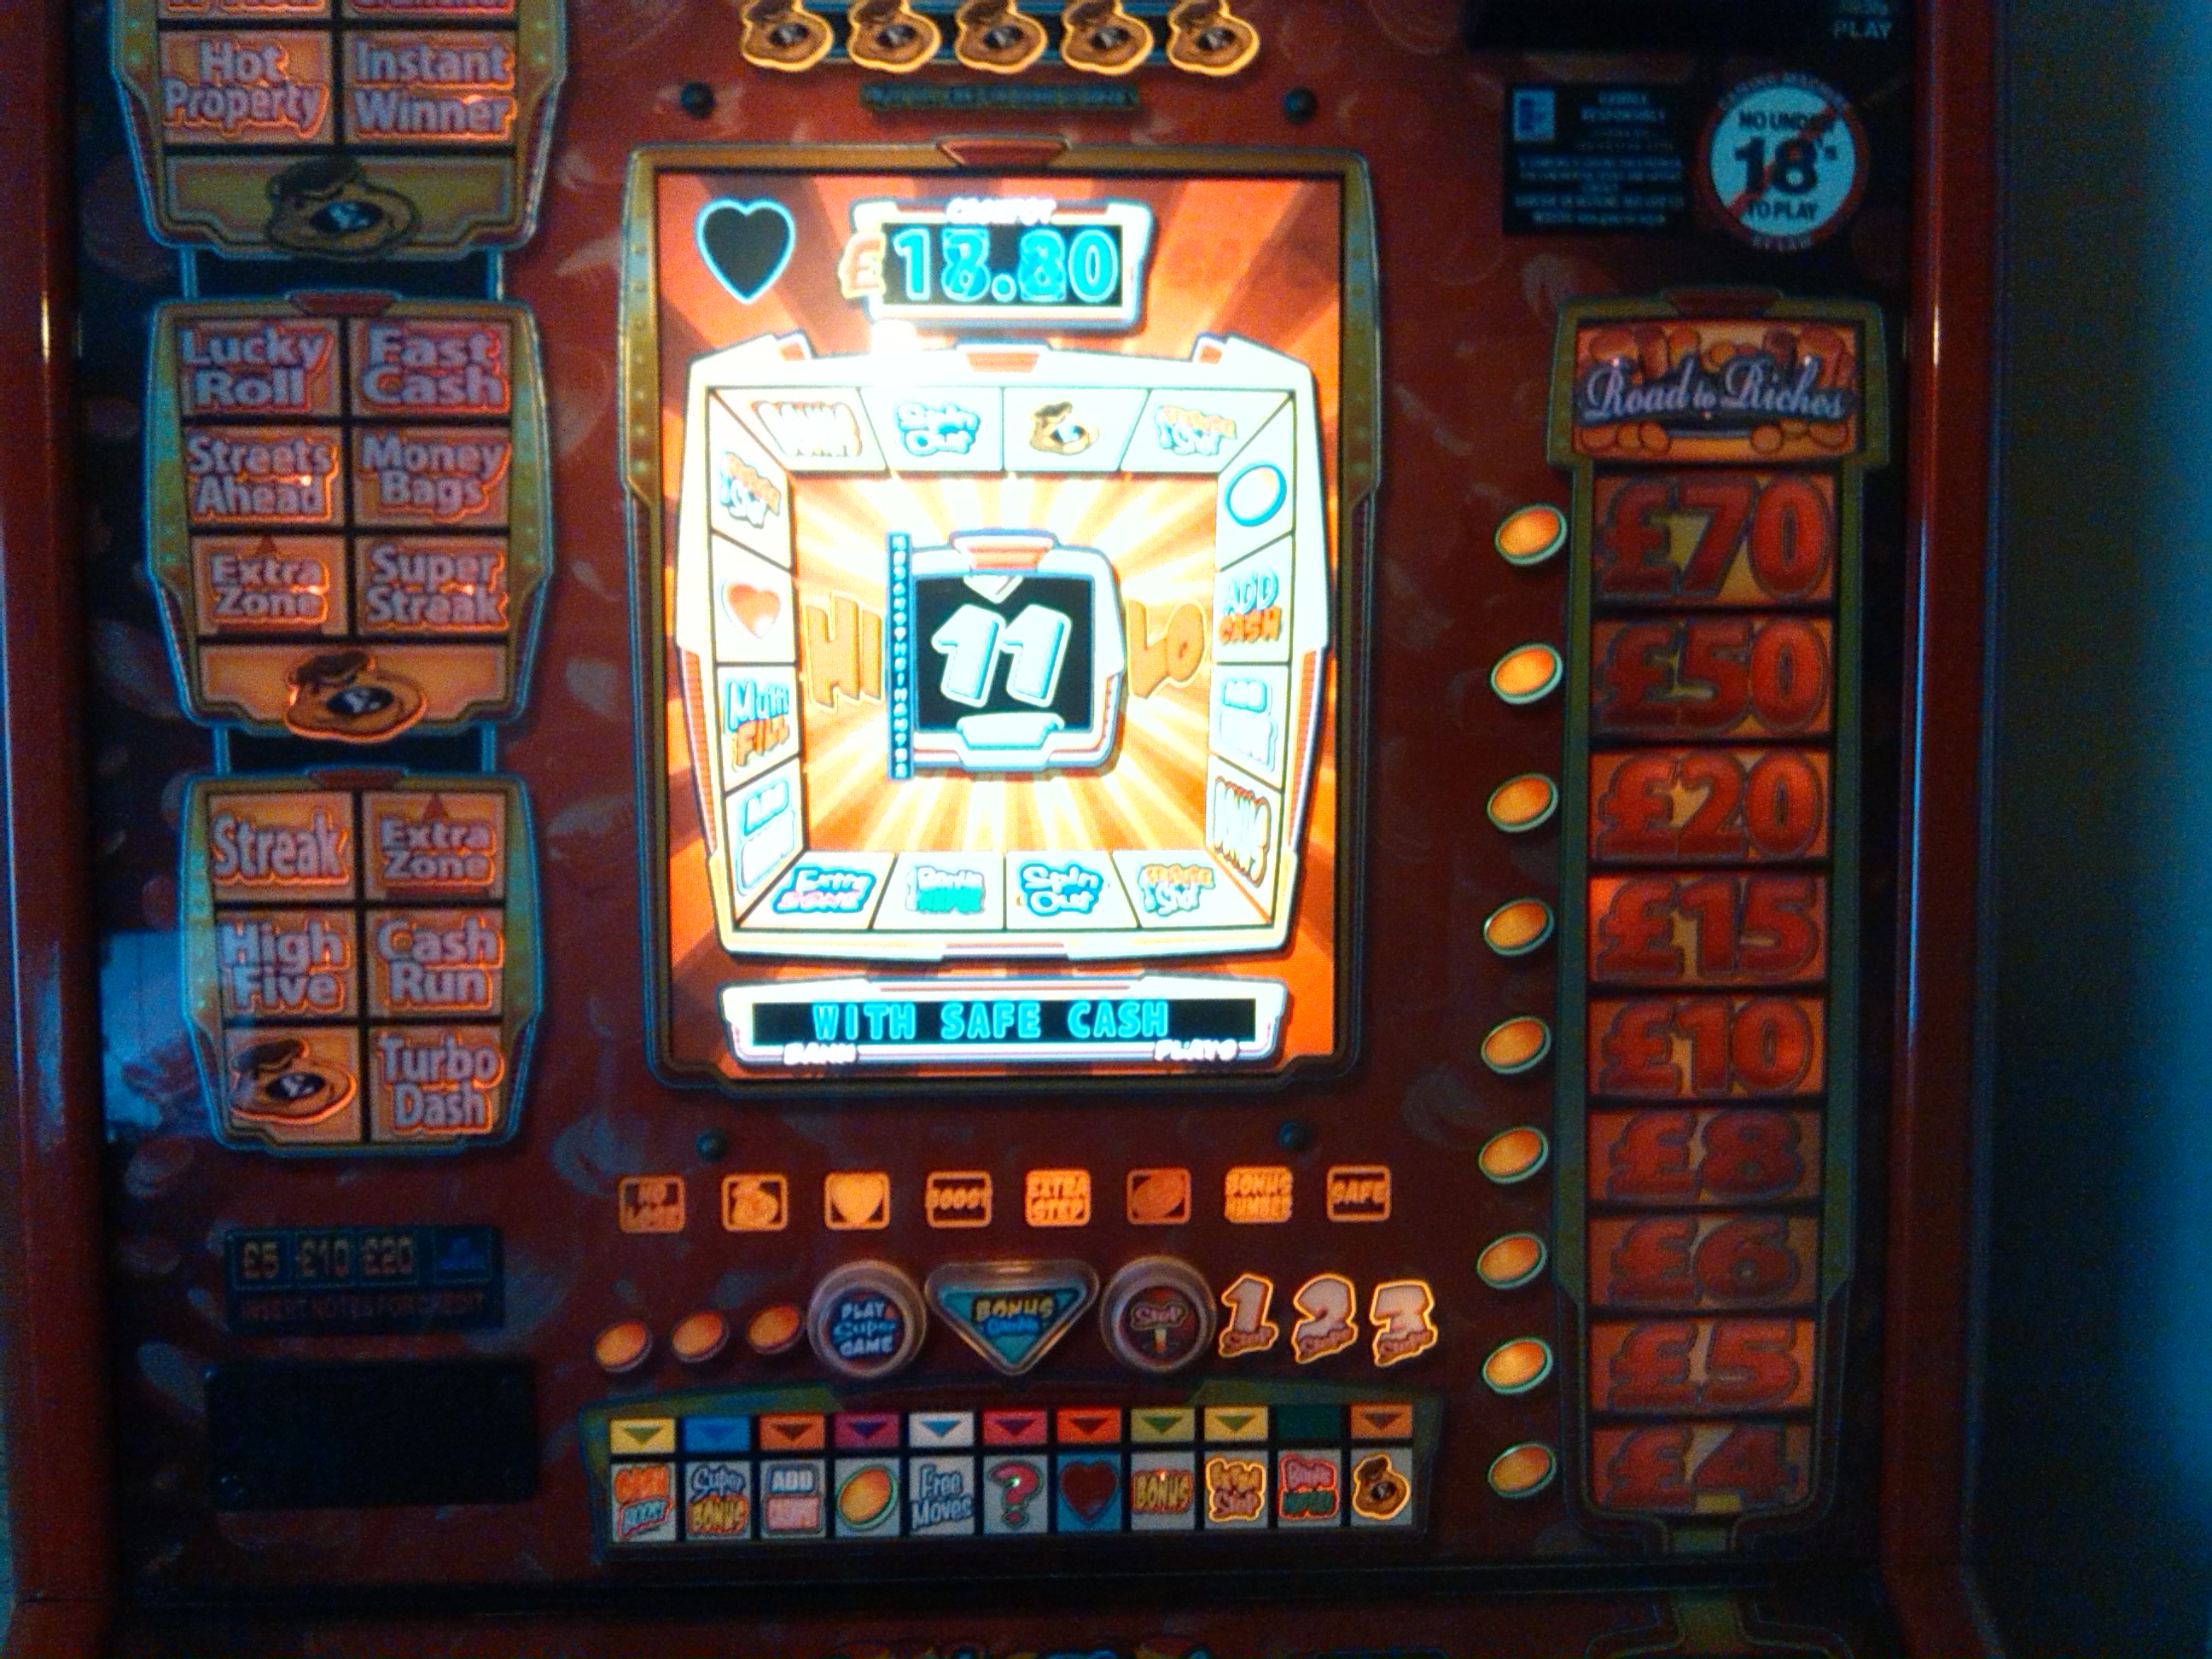 Road TO riches Â£70 jackpot.jpg